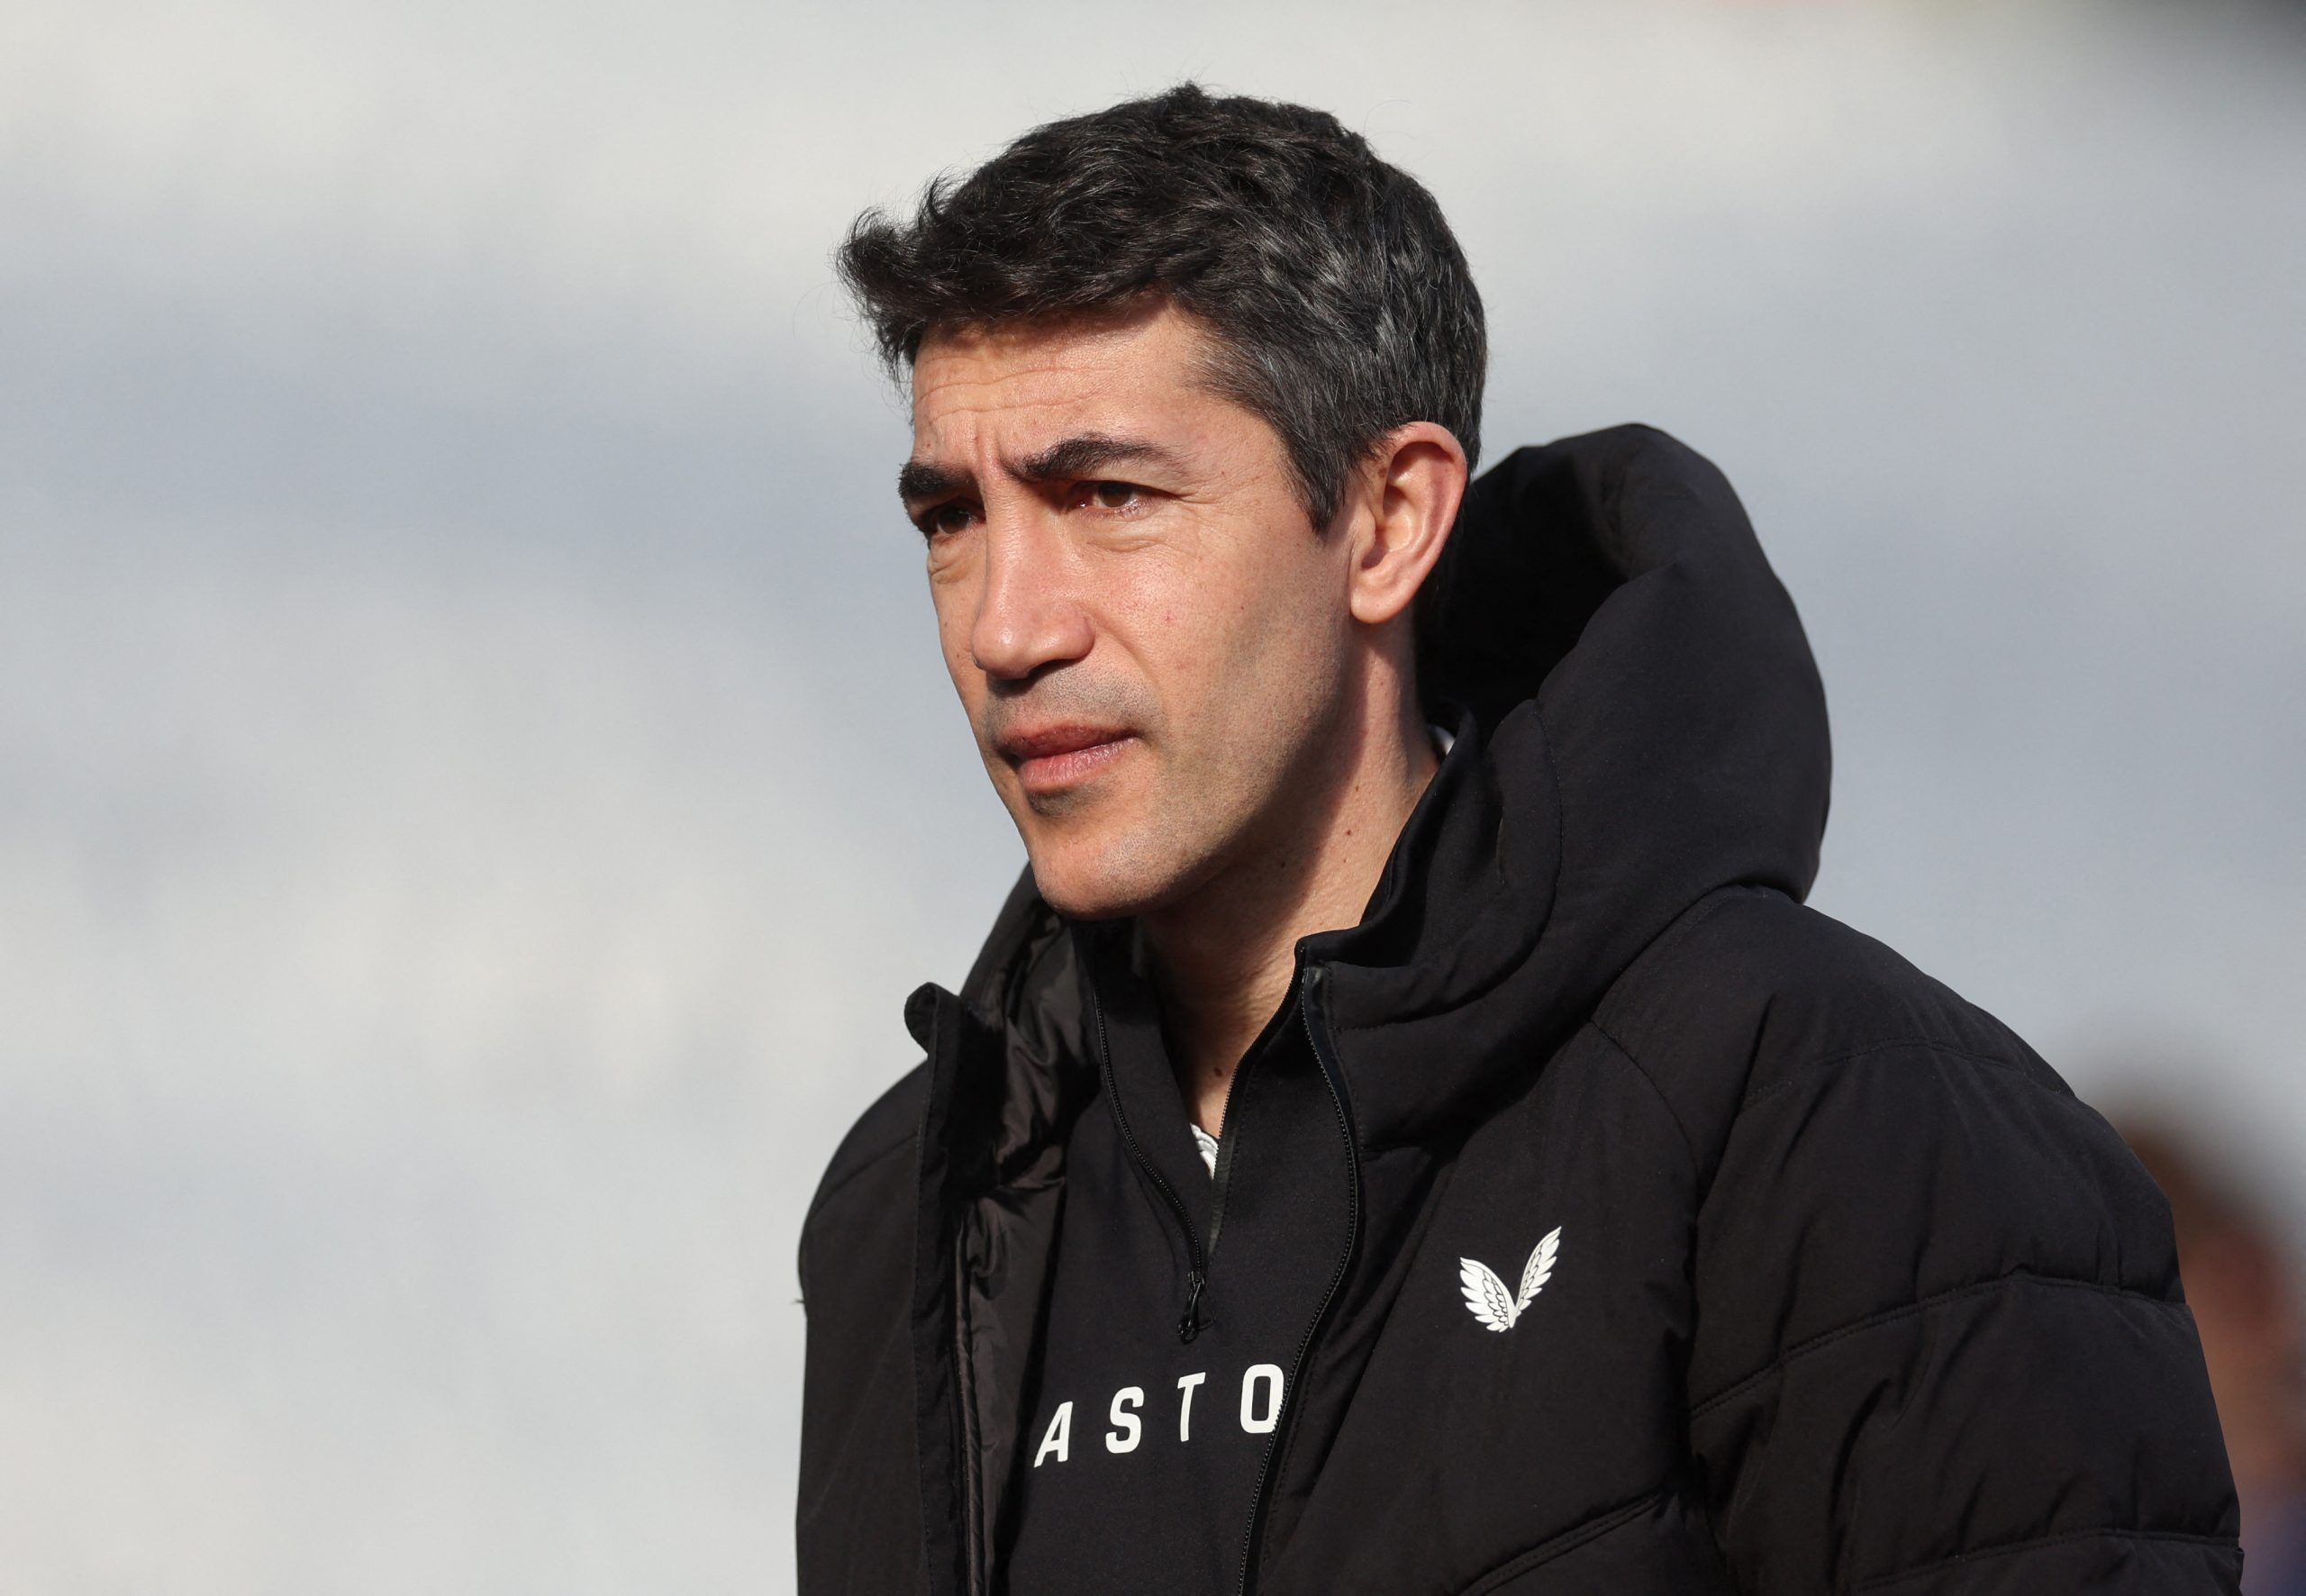 Bruno Lage, Fosun, Jeff Shi, Molineux, The Old Gold, Wolves, Wolves fans, Wolves info, Wolves latest, Wolves news, Wolves updates, WWFC, WWFC news, WWFC update, Premier League, Premier League news, Wolverhampton Wanderers, Crystal Palace, Predicted XI, 
